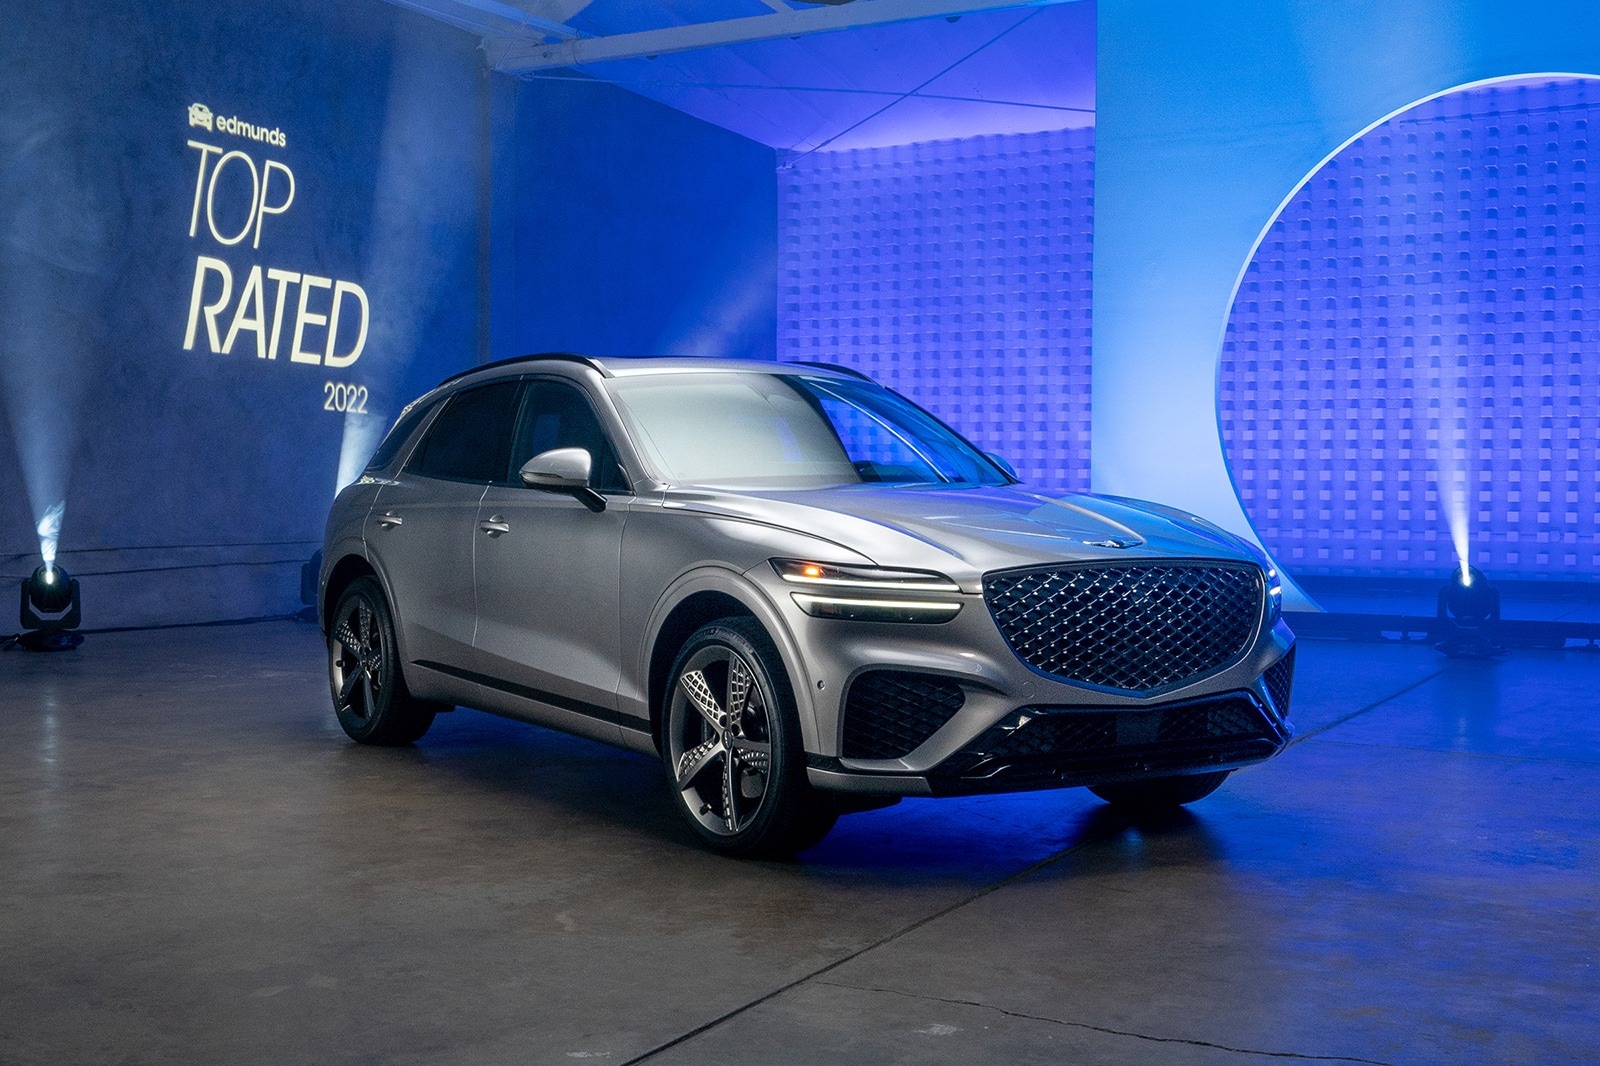 Genesis GV70 Is the Edmunds Top Rated Luxury SUV for 2022